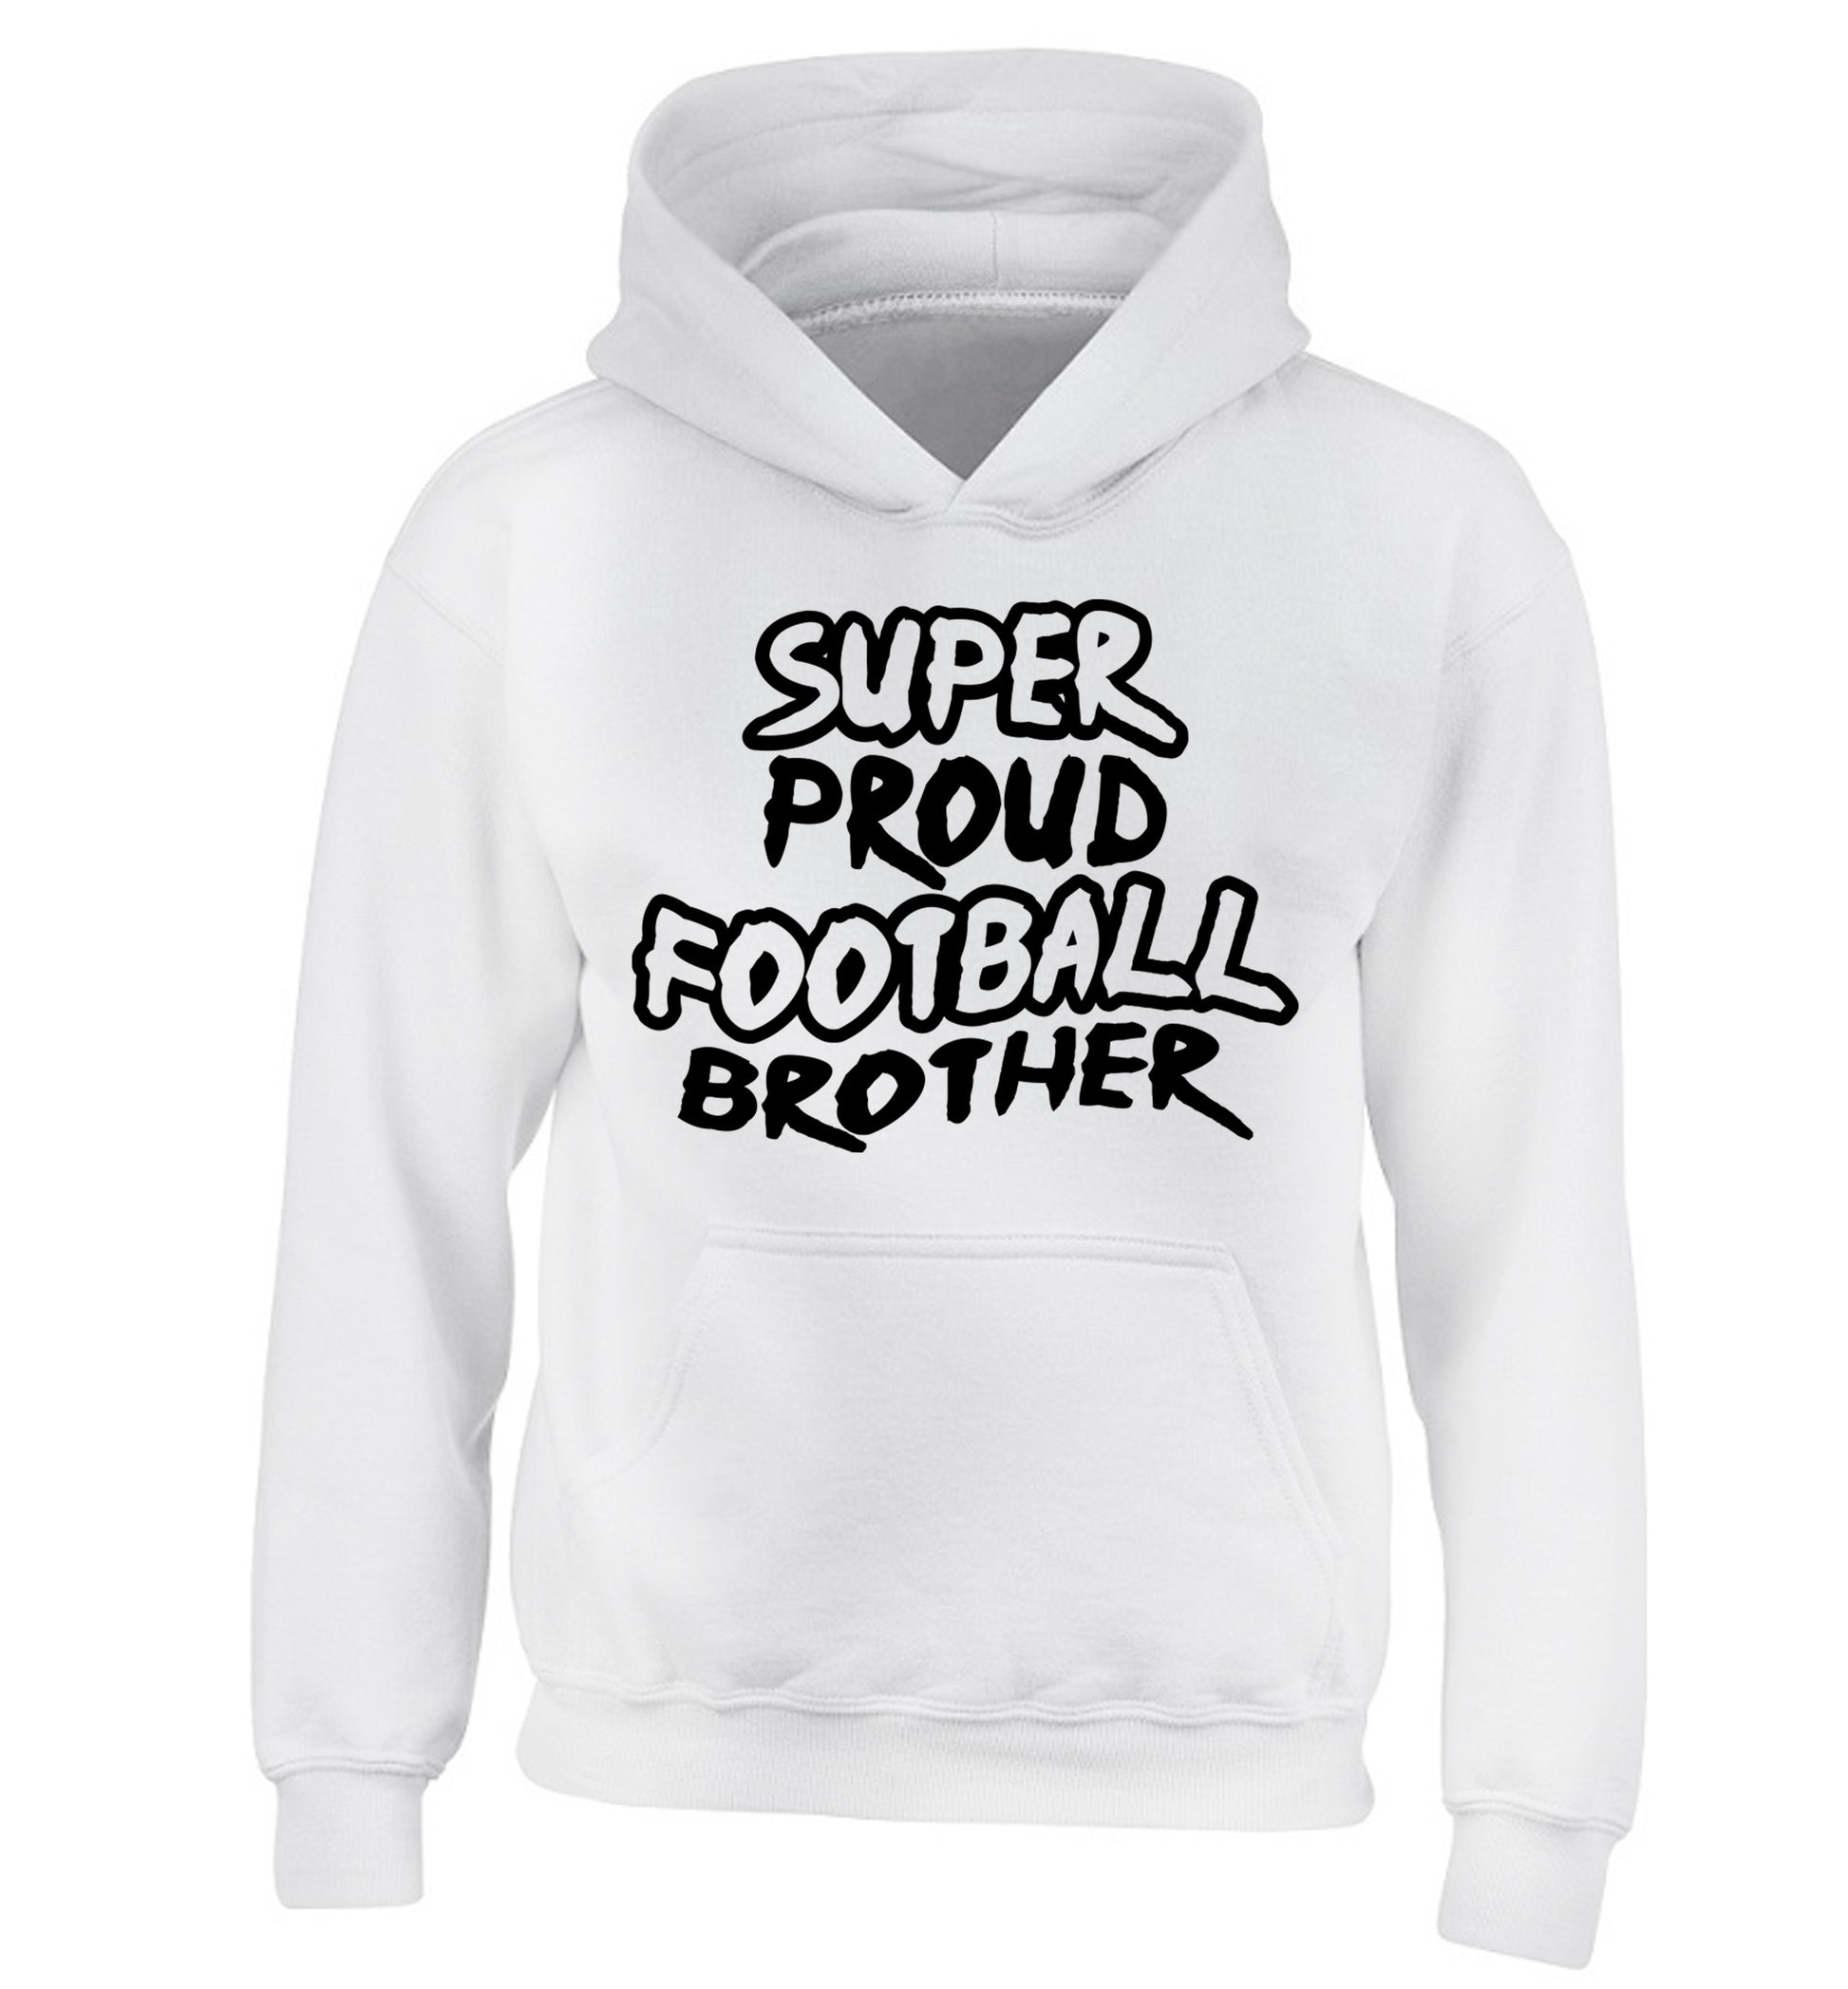 Super proud football brother children's white hoodie 12-14 Years